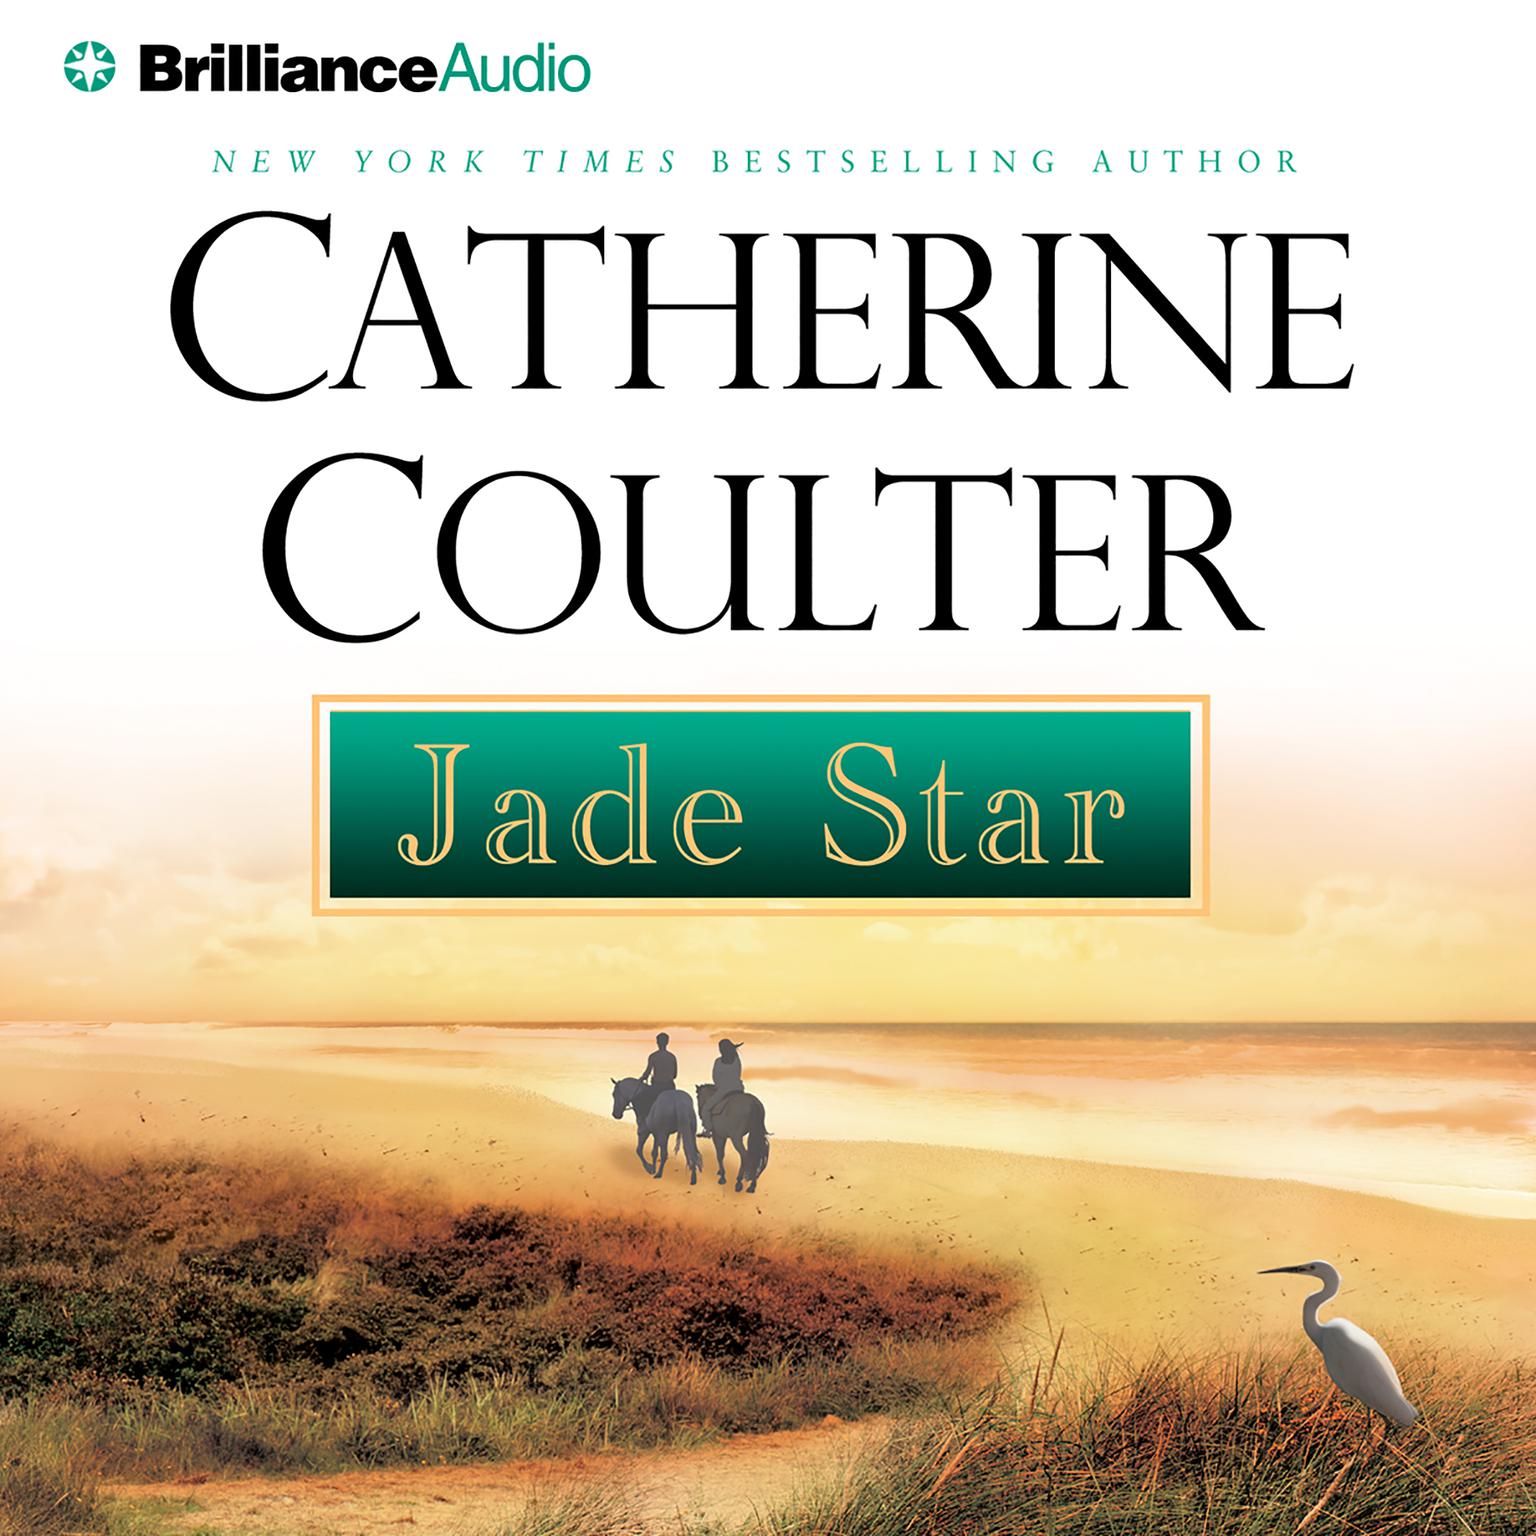 Jade Star (Abridged) Audiobook, by Catherine Coulter